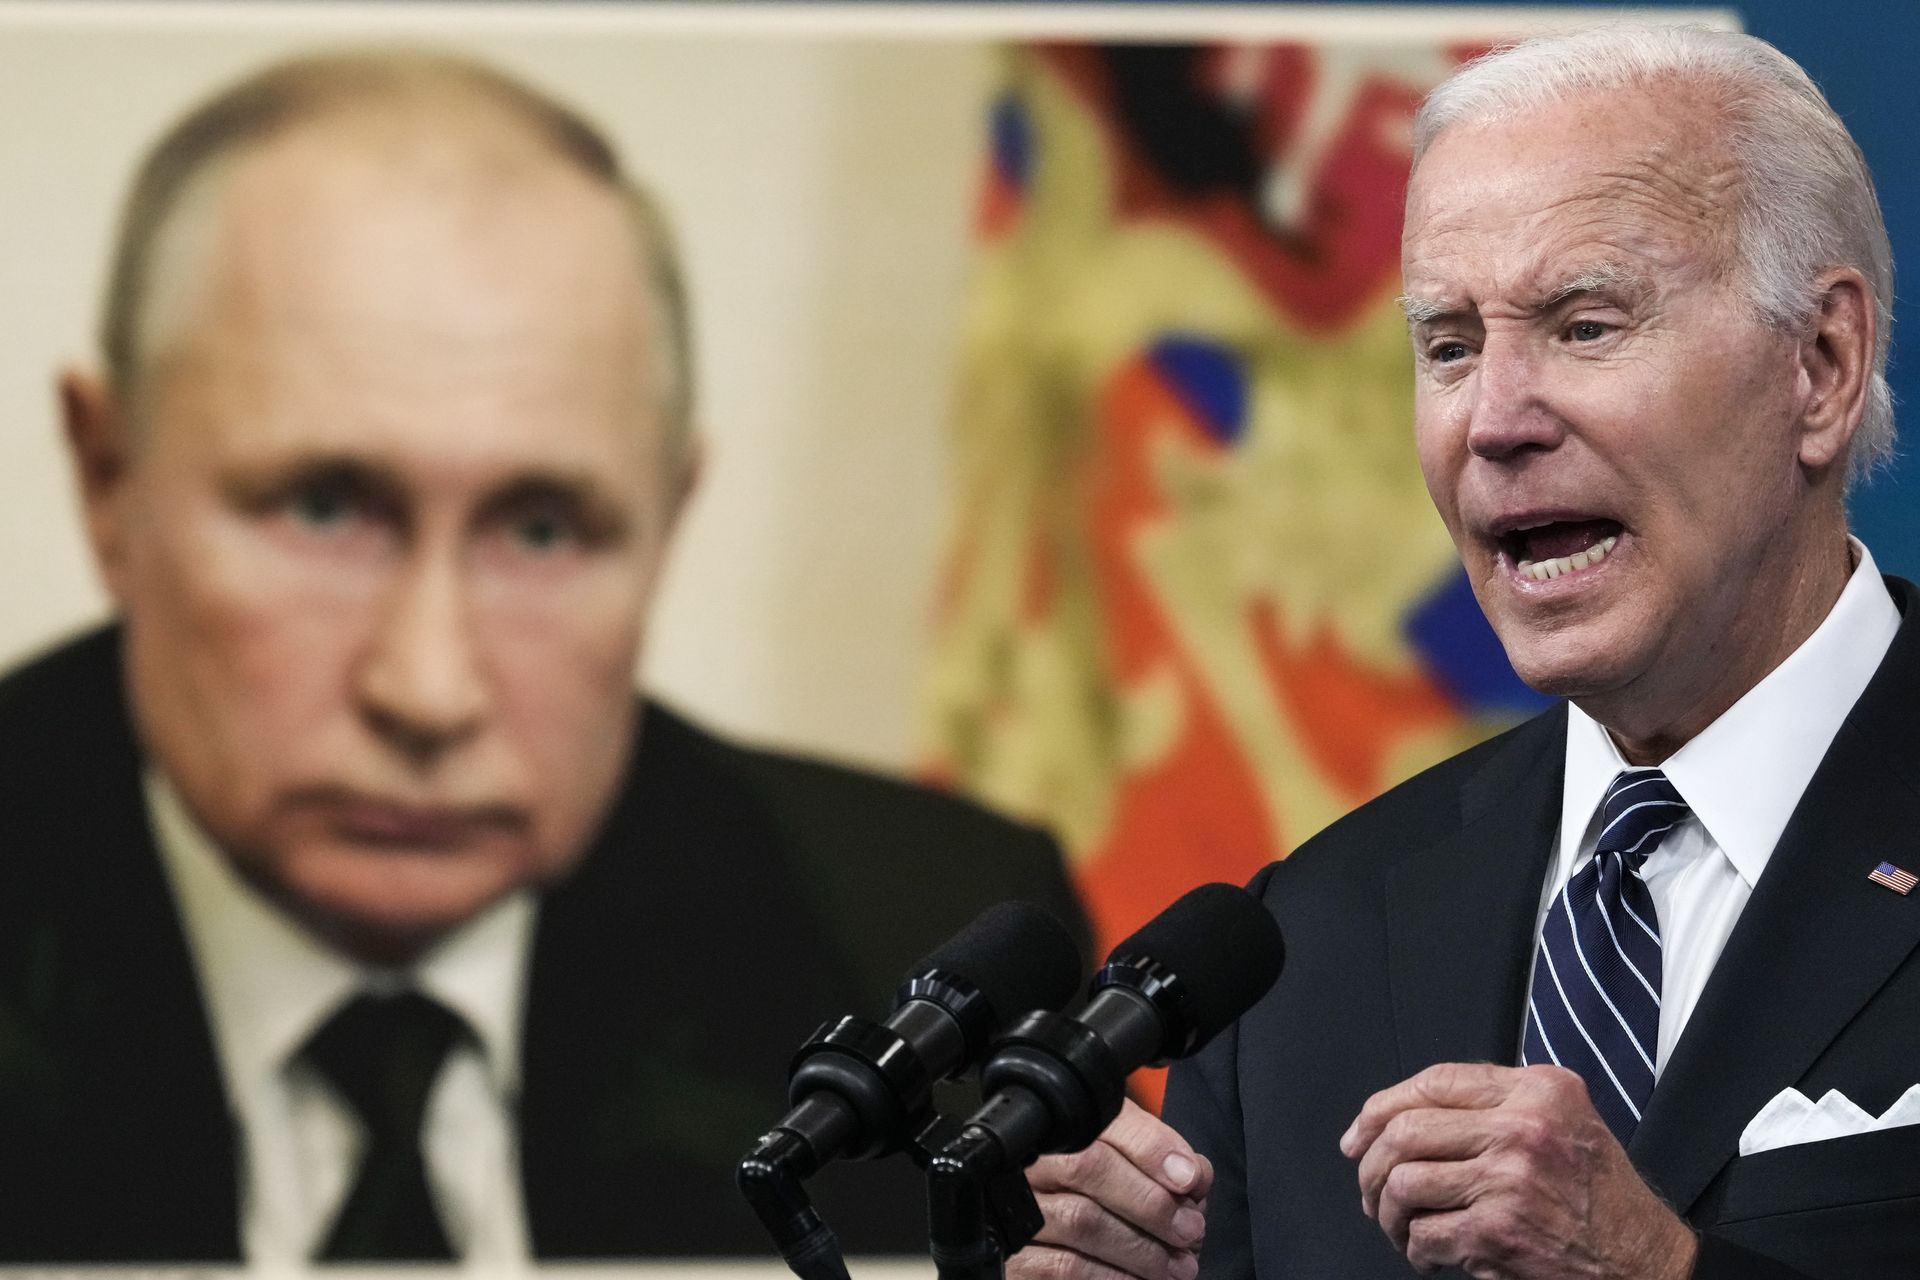 Here’s a list of the weapons Biden is sending to Ukraine after months of waiting